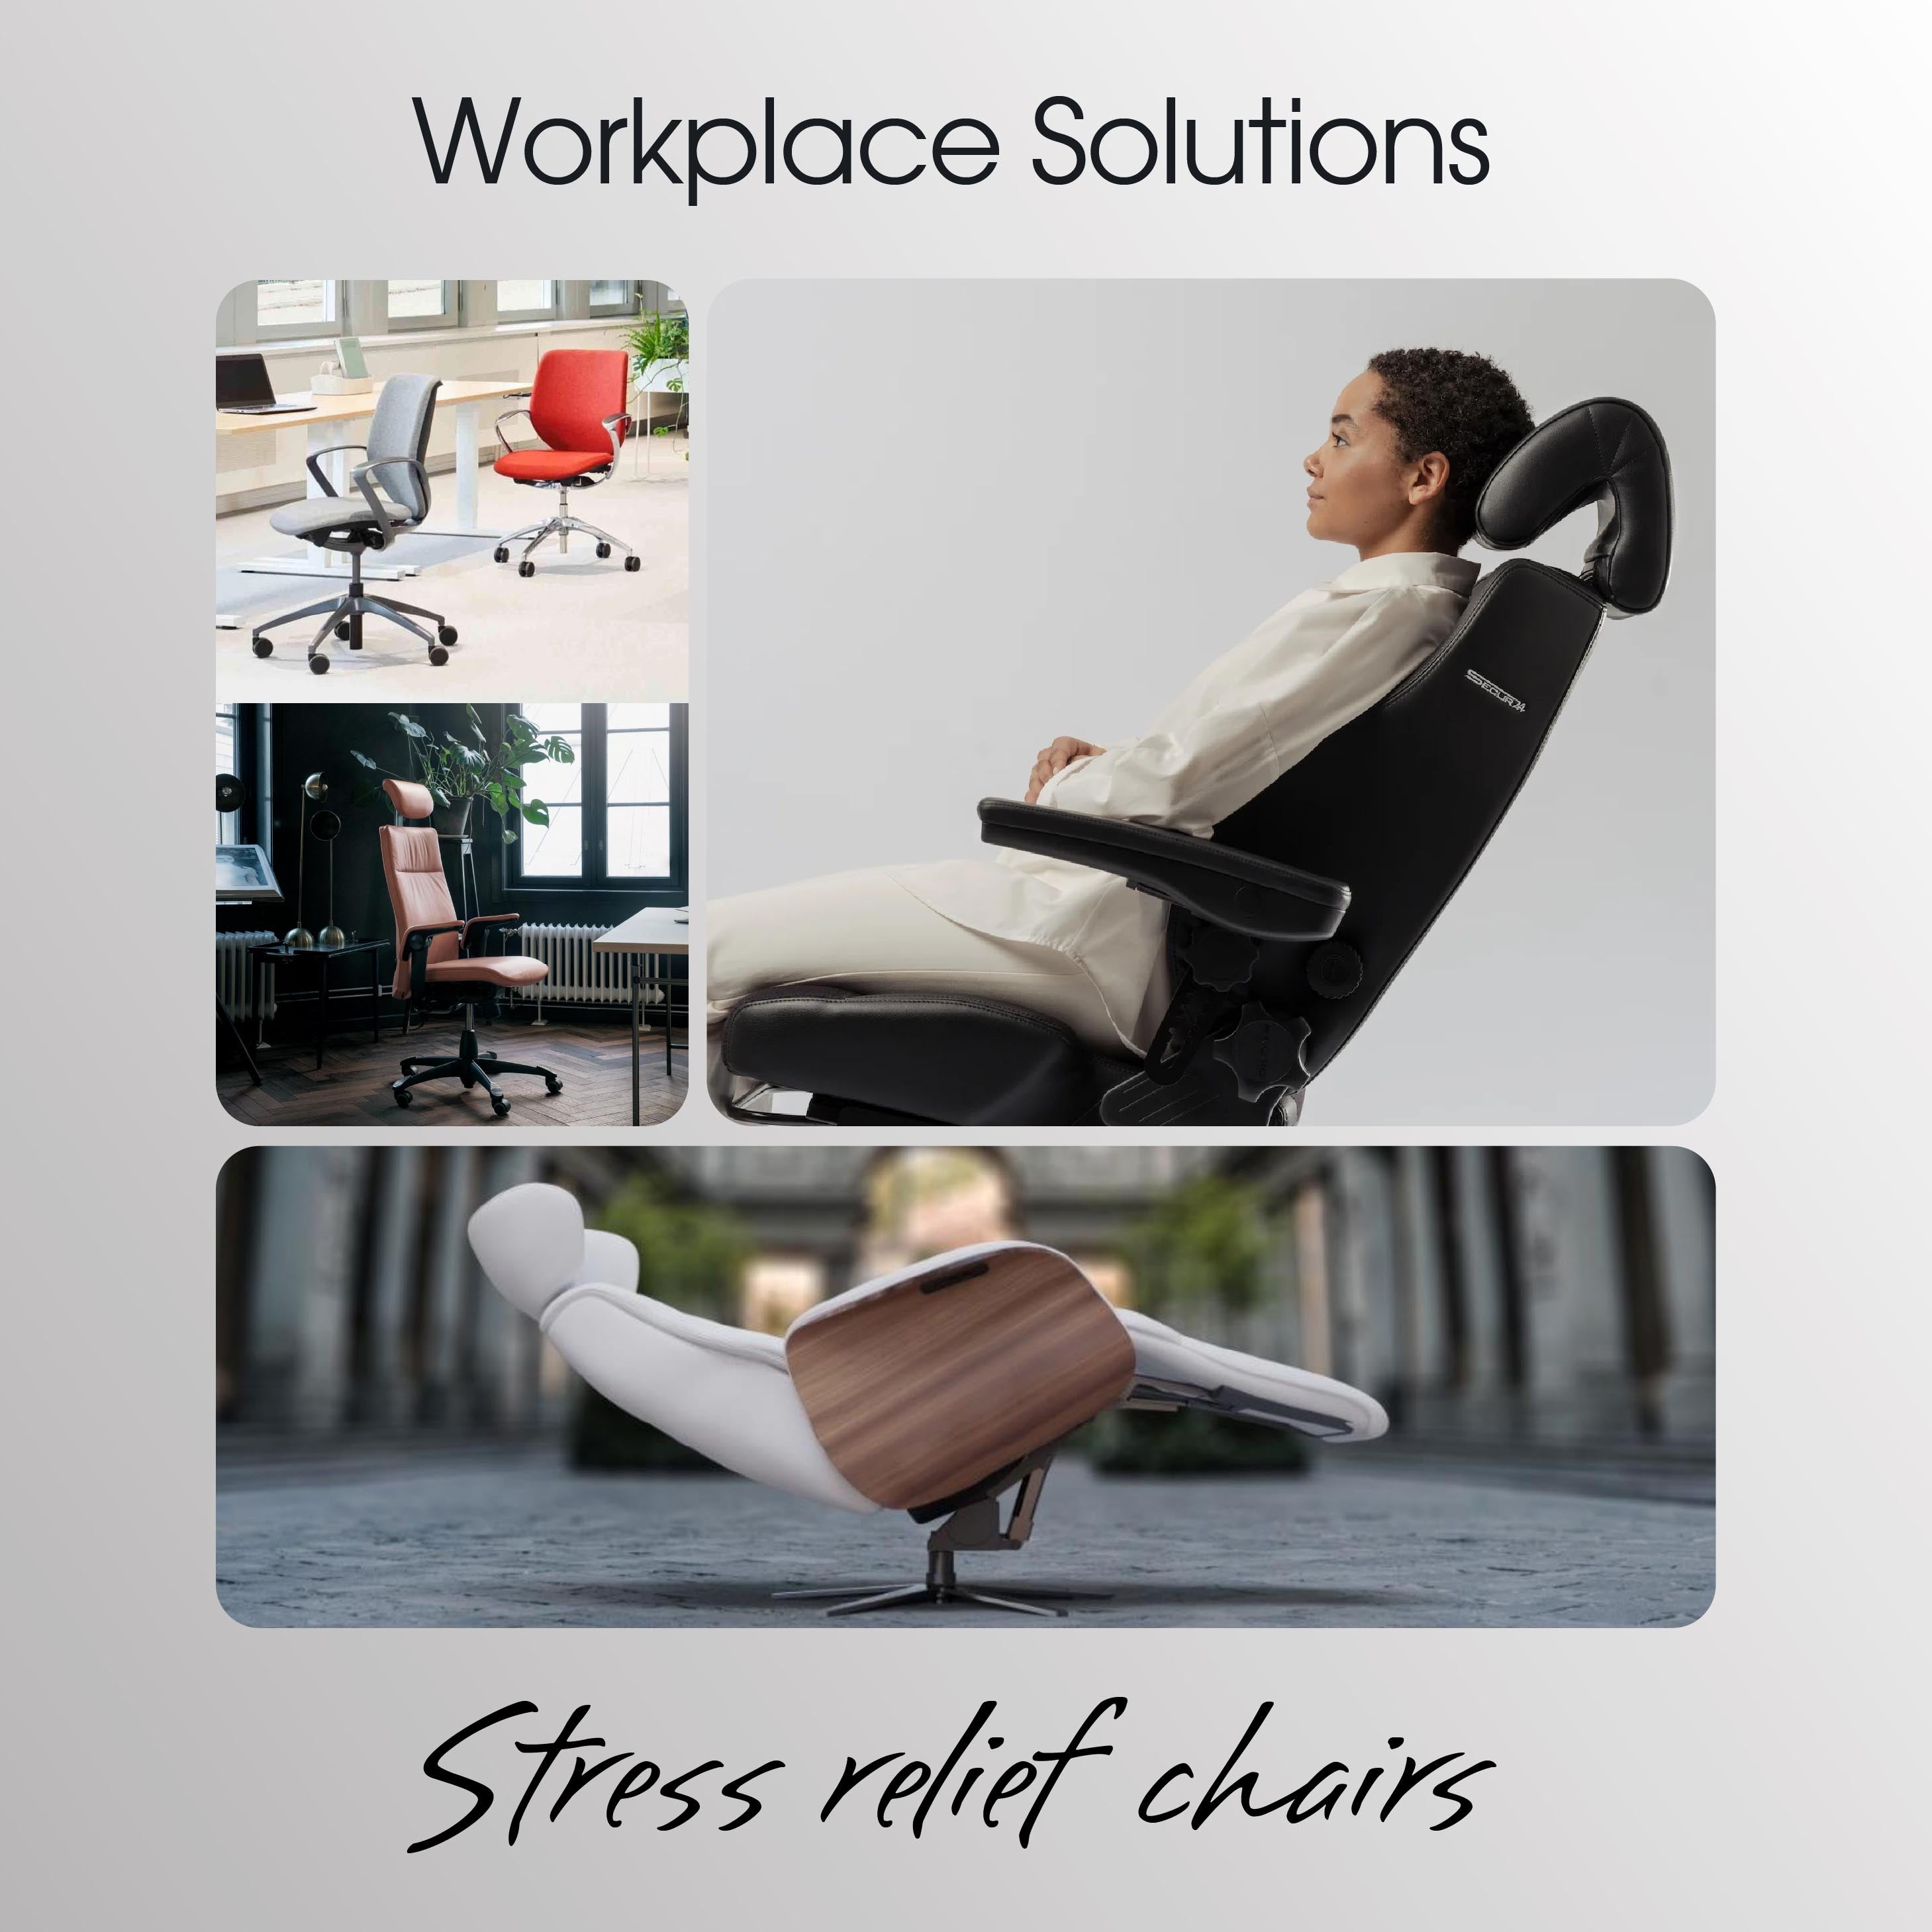 WORKPLACE SOLUTIONS | STRESS RELIEF CHAIRS